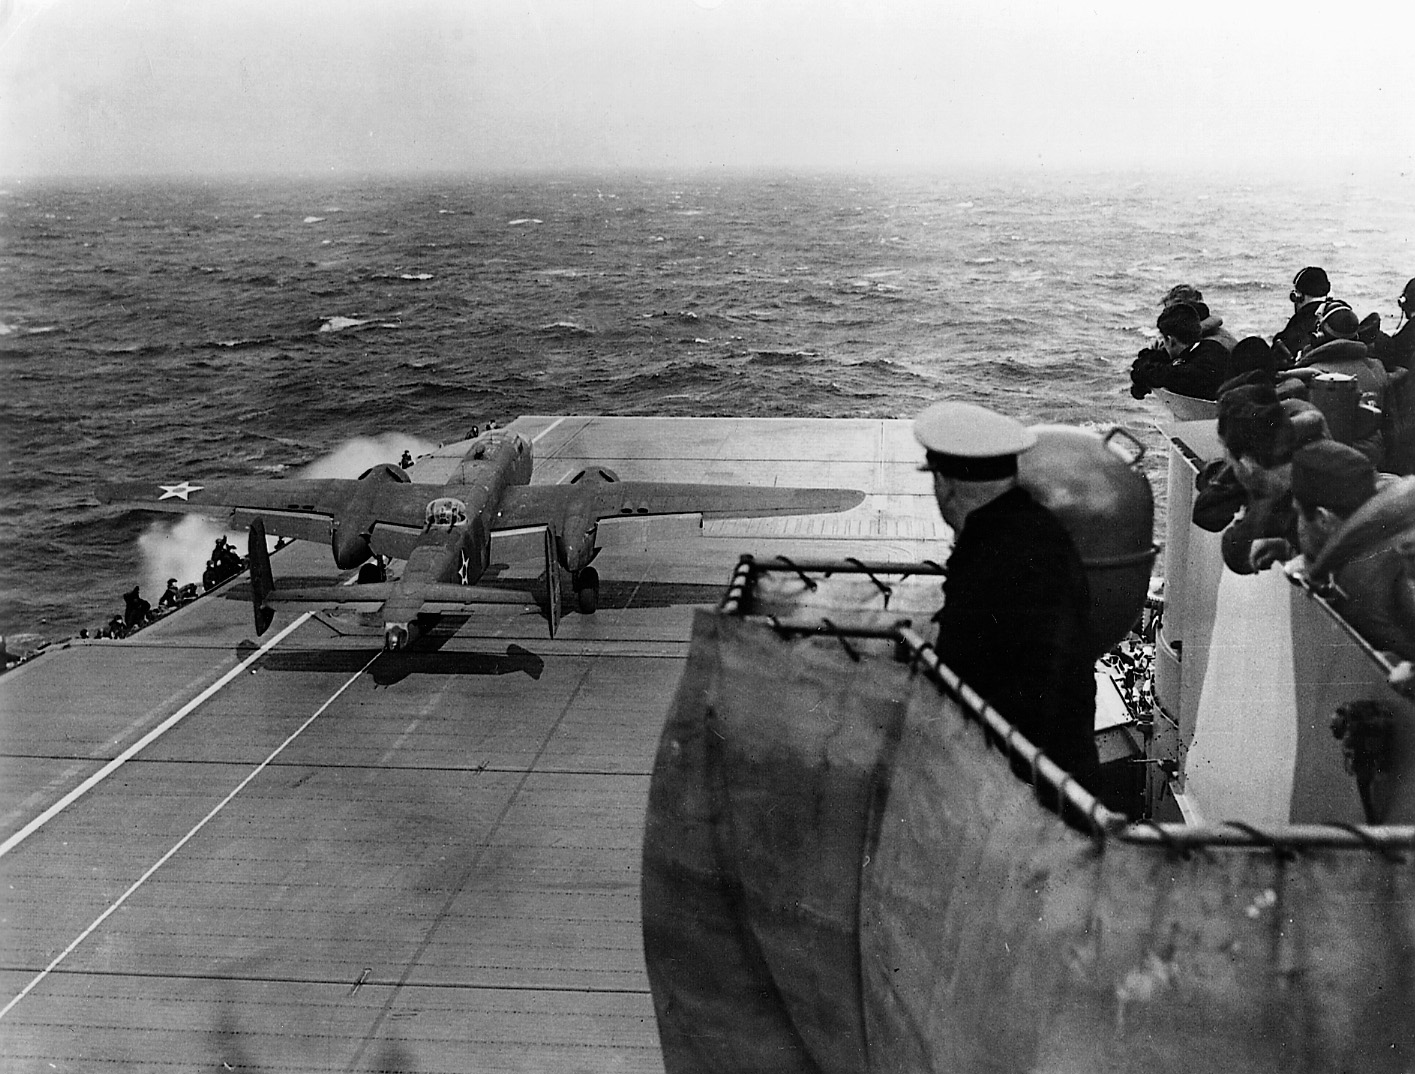 A B-25 bomber takes off from the deck of the USS Hornet.